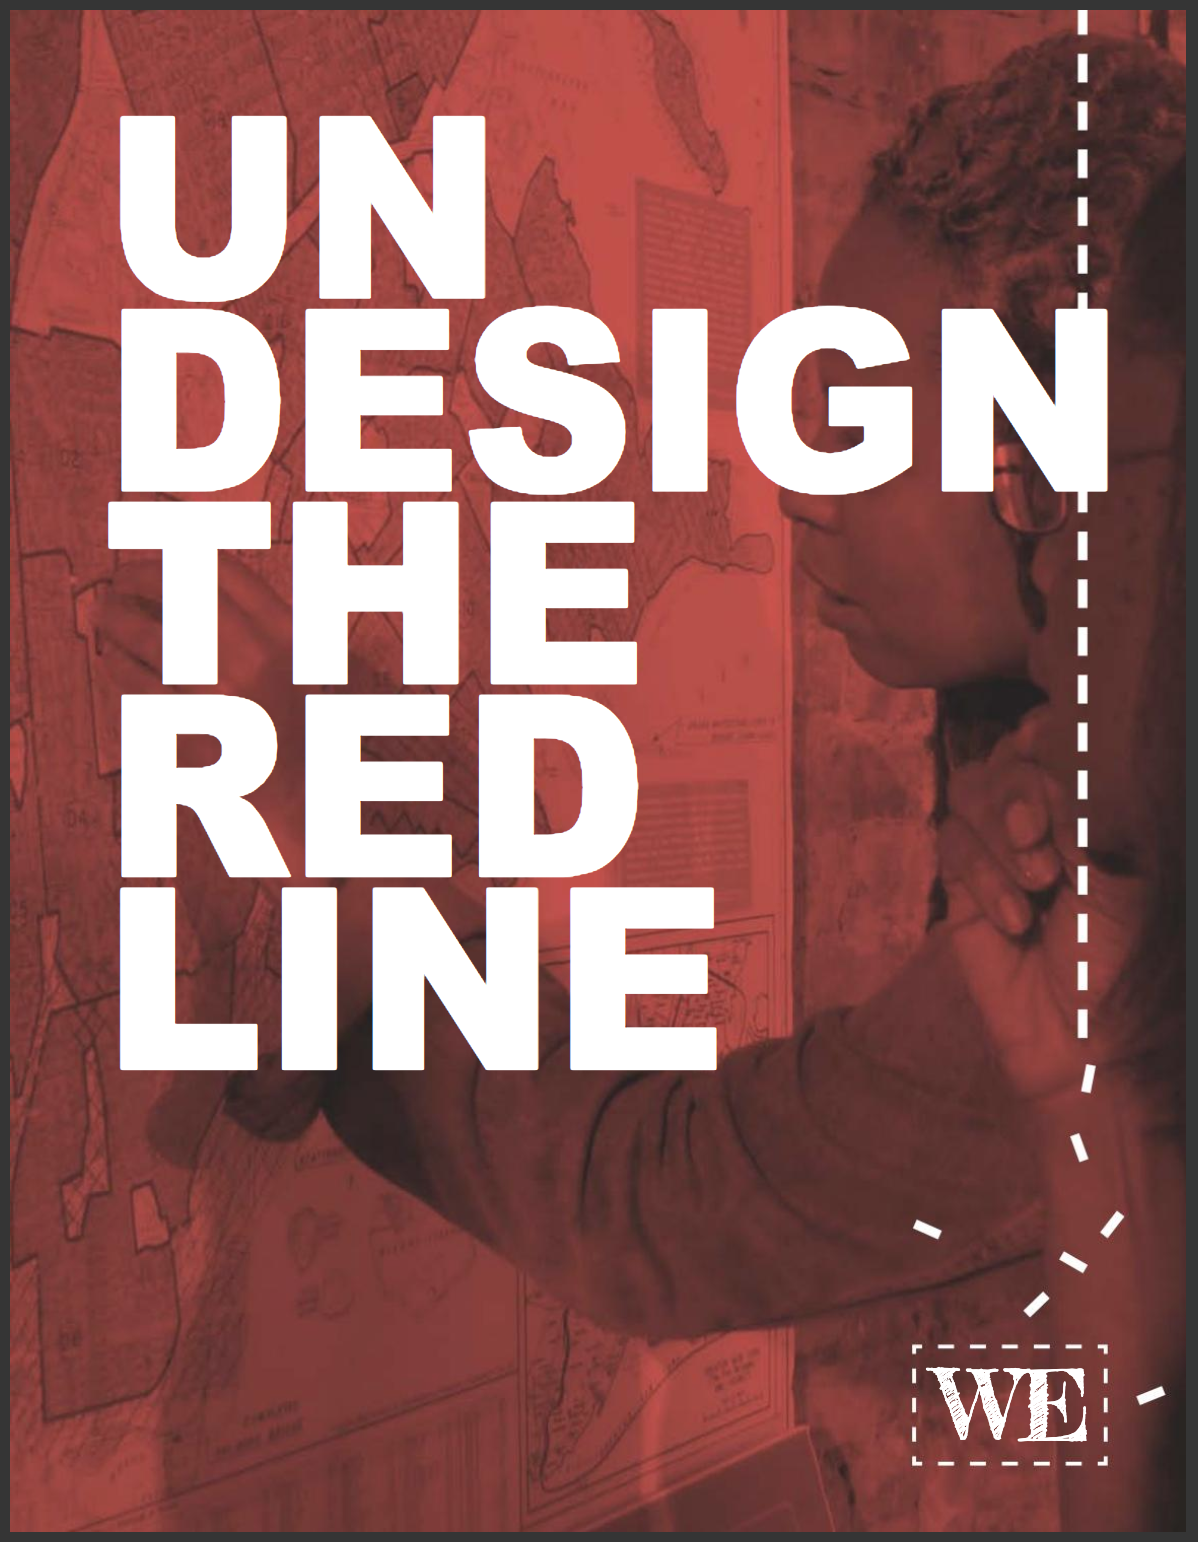 Undesign the Redline Logo, white text against a red background with designing the WE logo in the bottom corner.